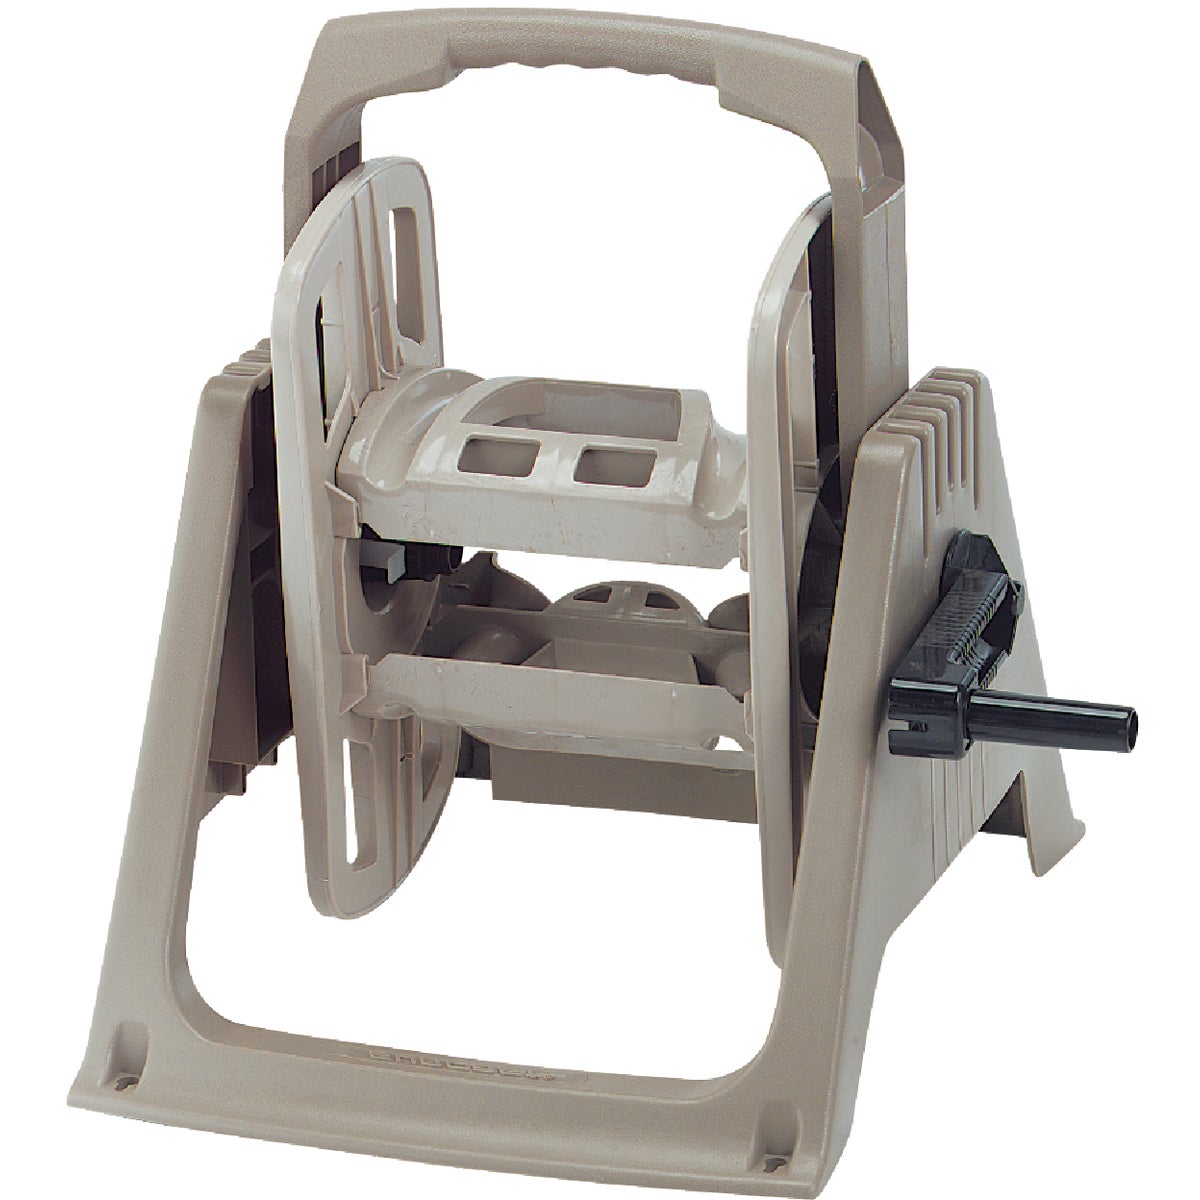 Item 761704, Portable or wall mount hose reel.